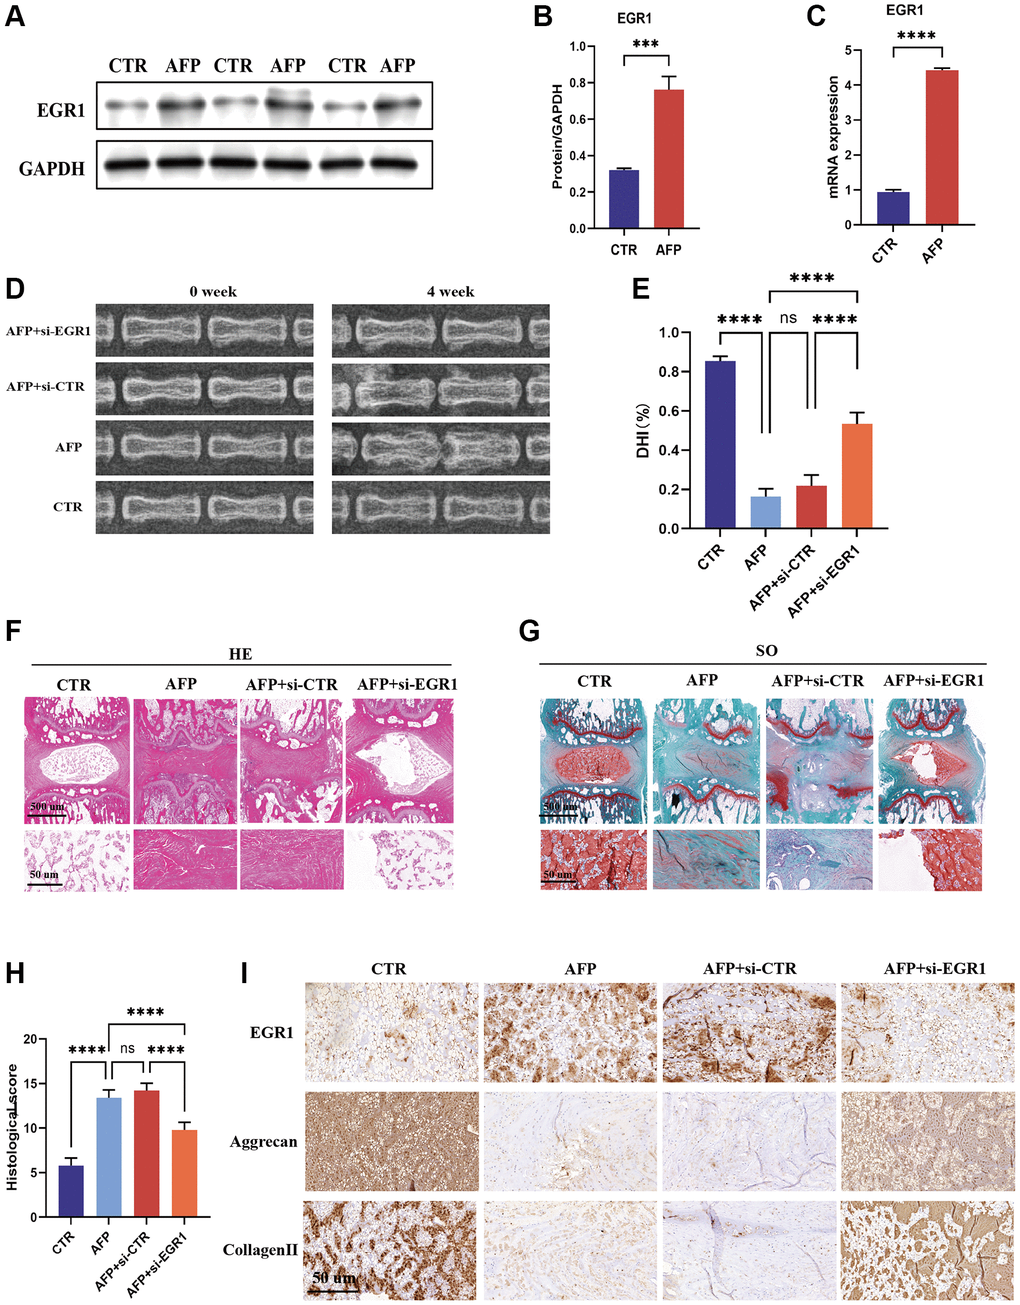 EGR1 siRNA alleviates the progression of IVDD in the AFP-treated rat model. (A) The protein expression of EGR1 in the IVDD rat model was determined by western blotting. (B) Quantitative analysis of EGR1 levels. (C) EGR1 mRNA expression in the IVDD rat model was examined by qRT-PCR. (D) X-ray images of the different groups before and 4 weeks after puncture. (E) Changes in intervertebral disc height were evaluated. (F, G) Representative images of HE and safranin-O staining in the four groups. (H) Histological scores were calculated. (I) Immunohistochemical staining of EGR1, aggrecan, and collagen II. ***p ****p 